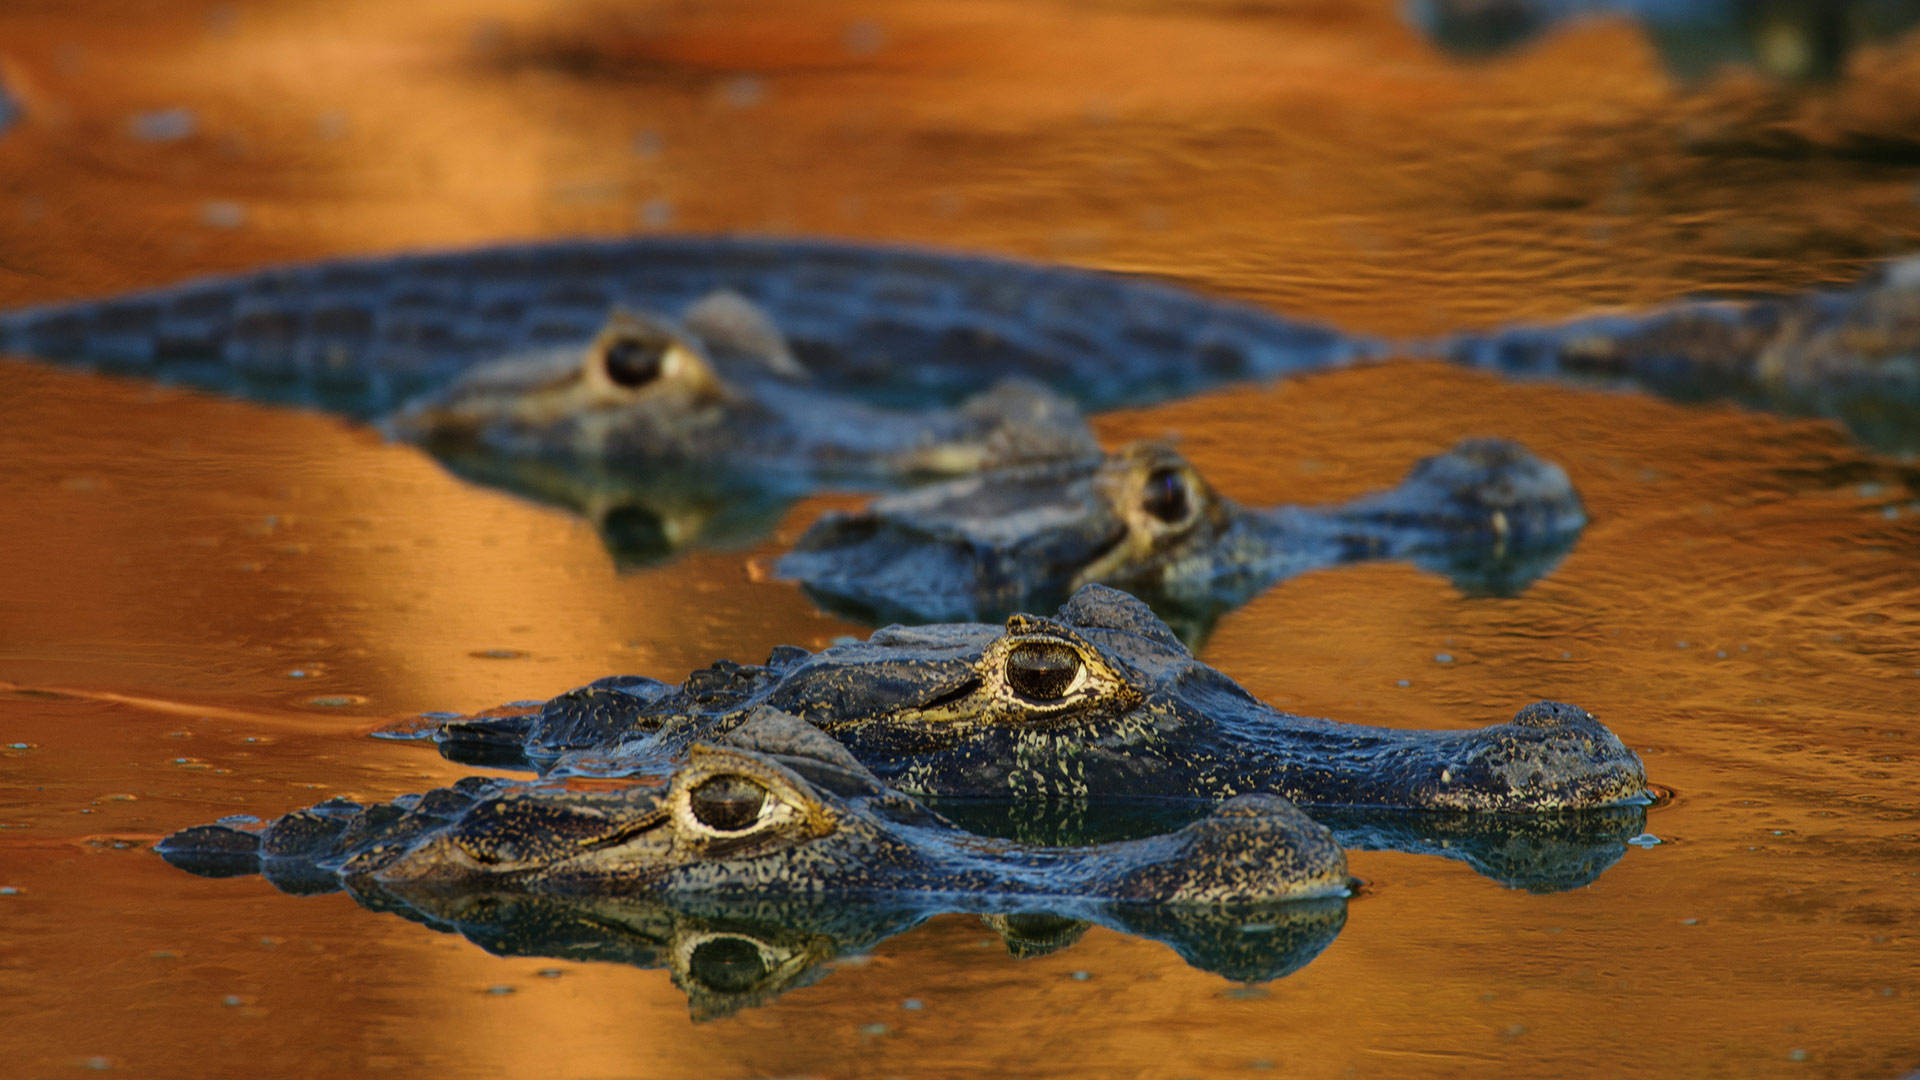 Several Caimans Flocked Together Are Peeking Out Of The Lake Water Revealing Their Eyes And Their Snouts